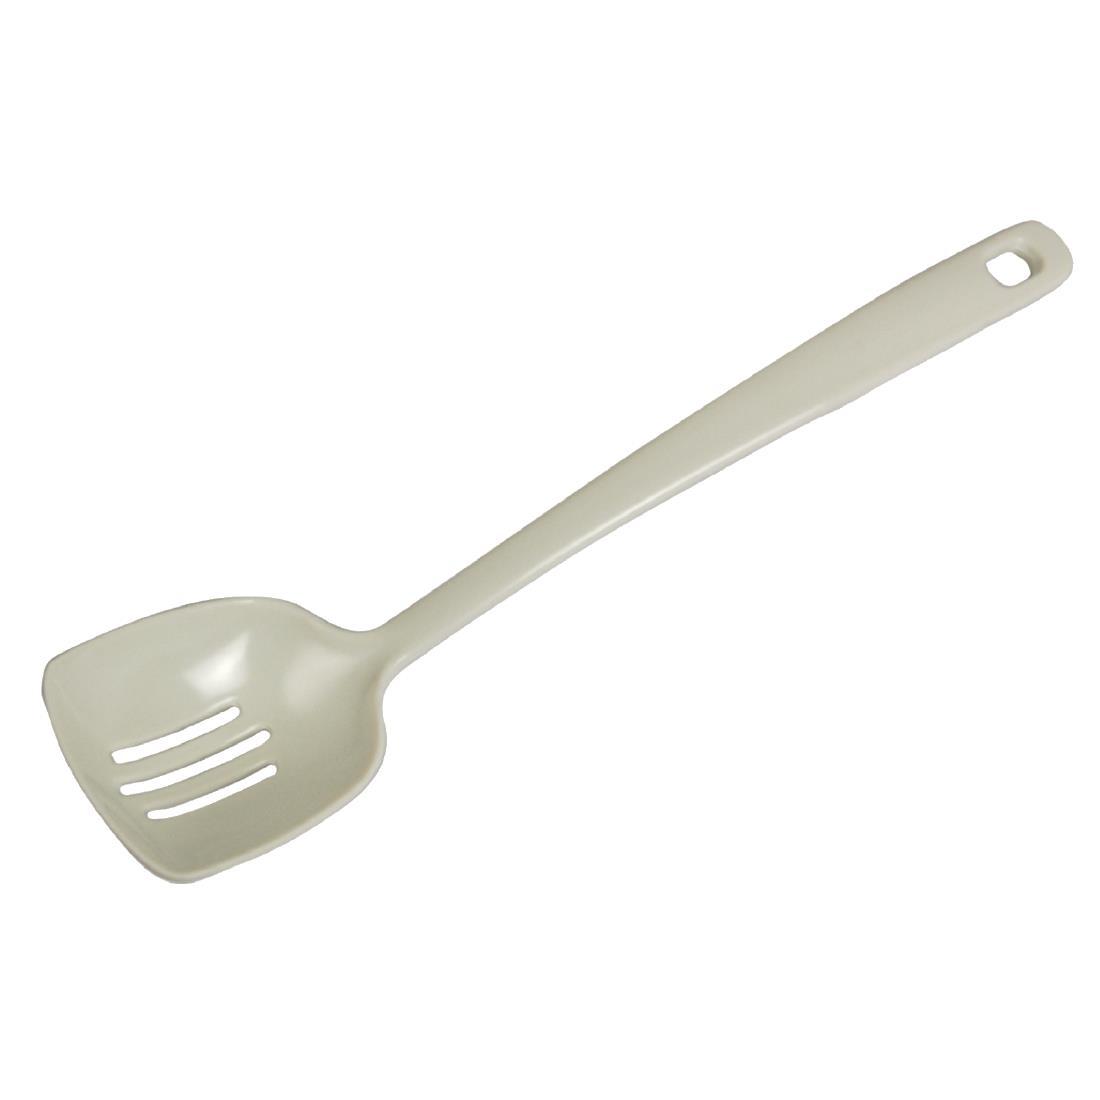 White Slotted Serving Spoon 10" - L295  - 1